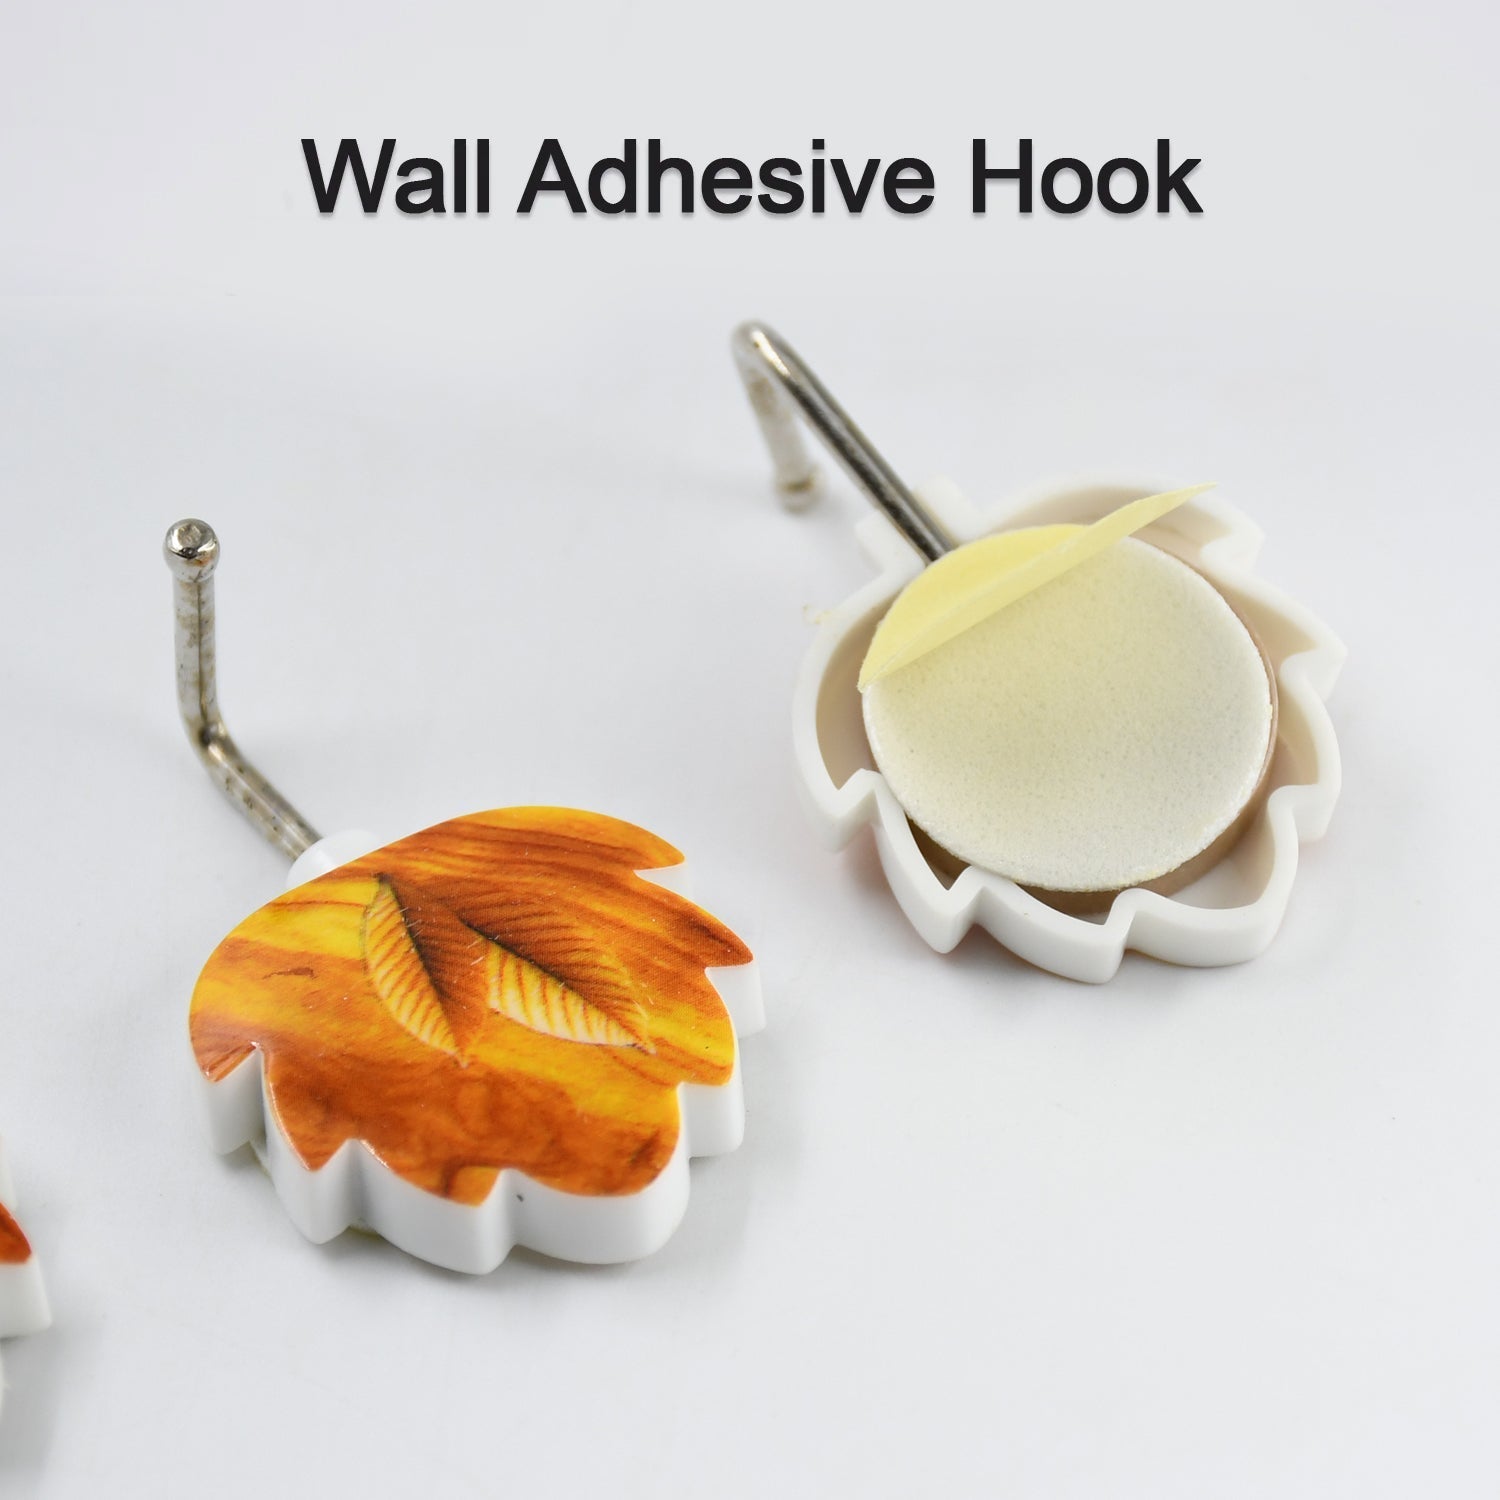 4585 Leaf Shape Hook Strong Adhesive Hook Use For Home Decor , Office & Multi Use Hook (3pc). 